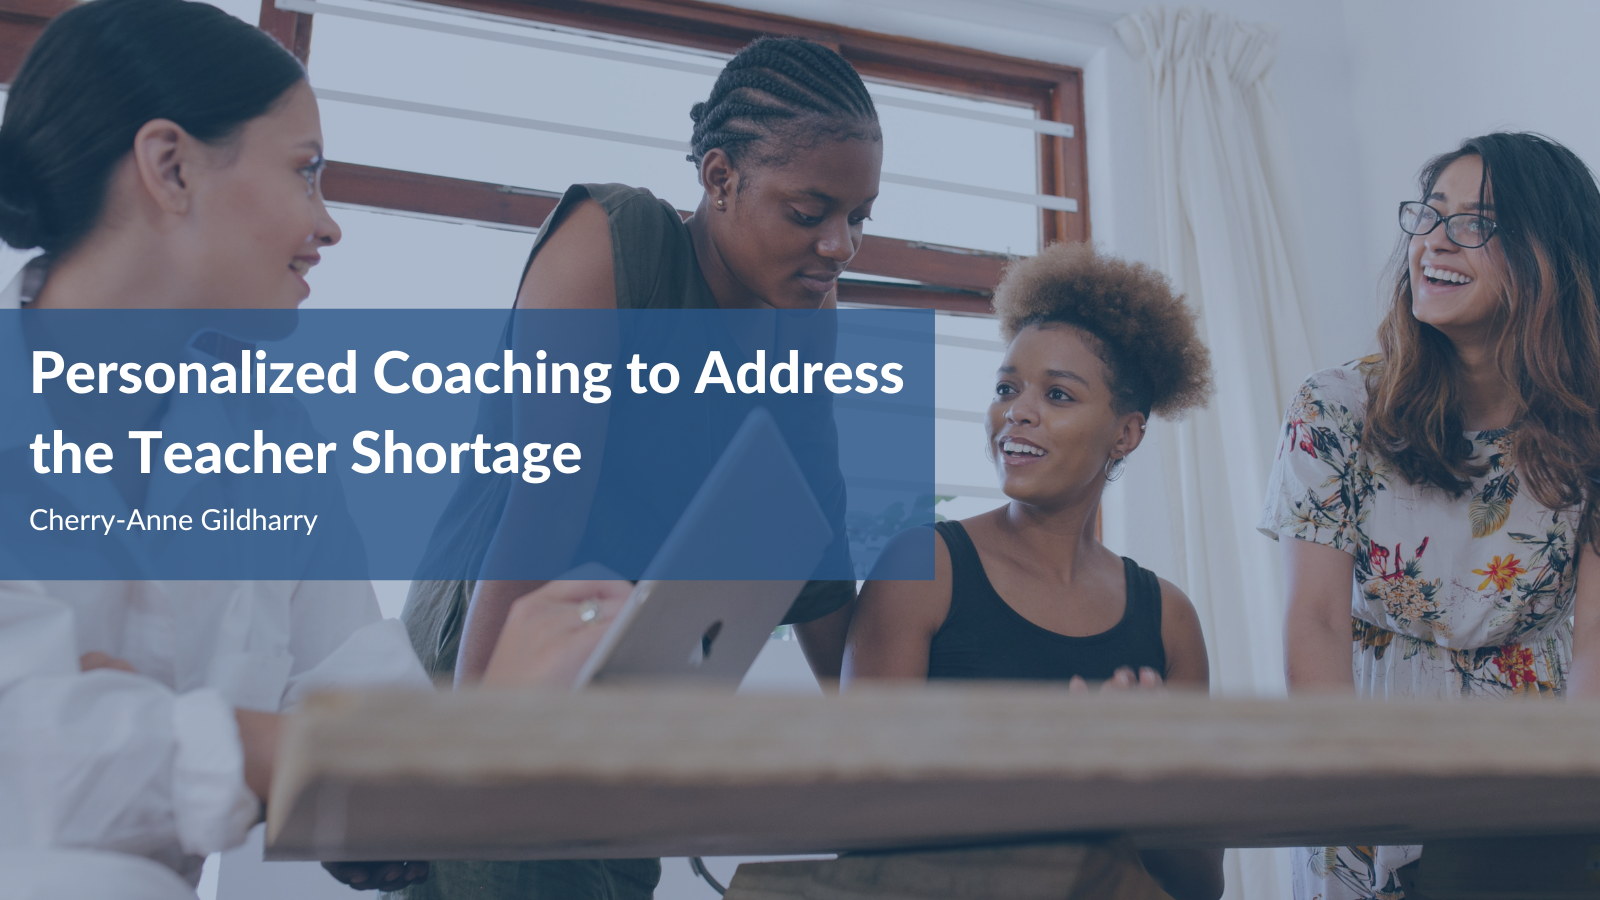 Personalized Coaching to Address the Teacher Shortage